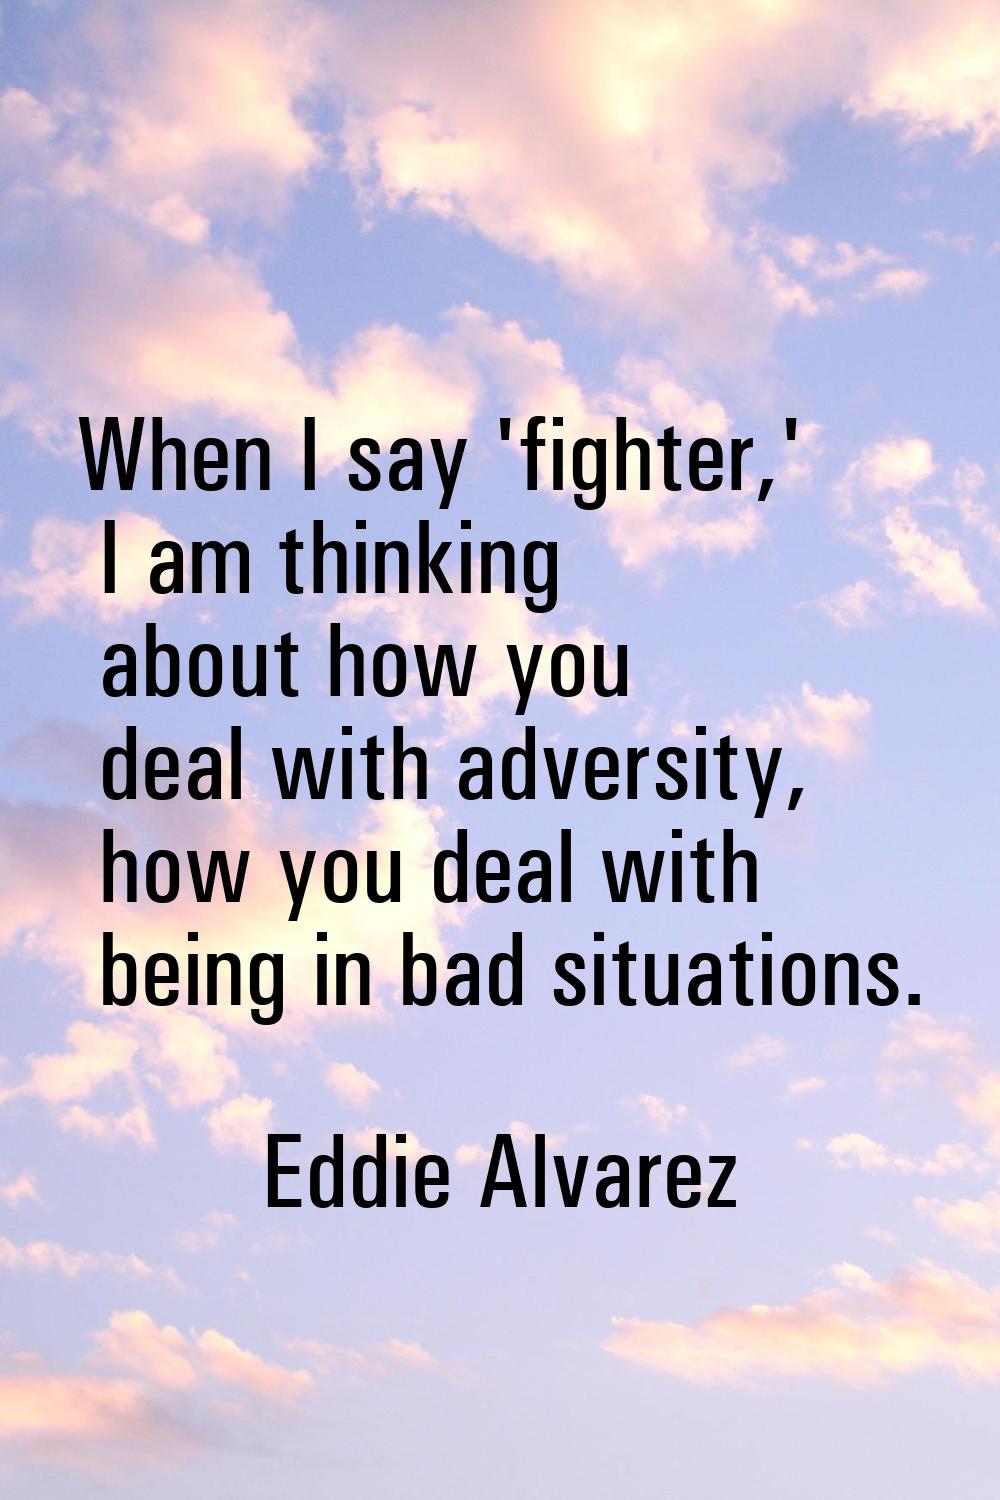 When I say 'fighter,' I am thinking about how you deal with adversity, how you deal with being in b